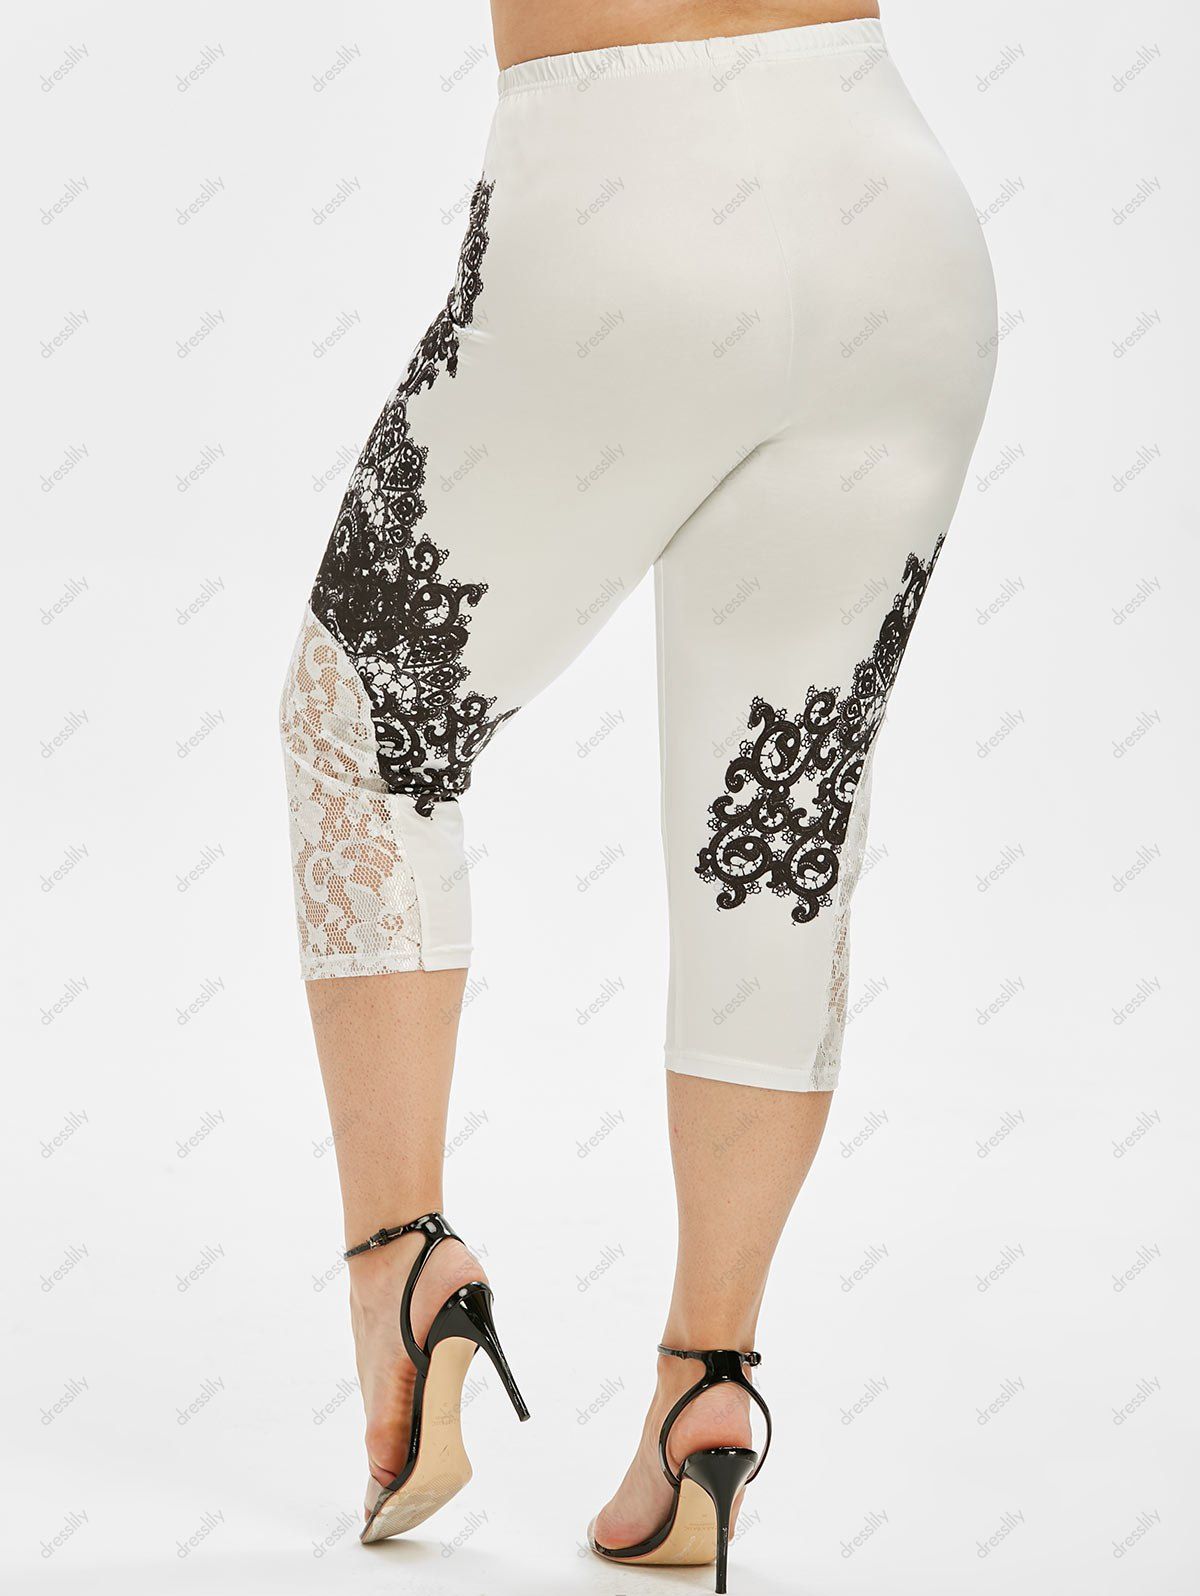 [67% OFF] 2021 Printed Lace Panel High Waisted Plus Size Capri Leggings ...